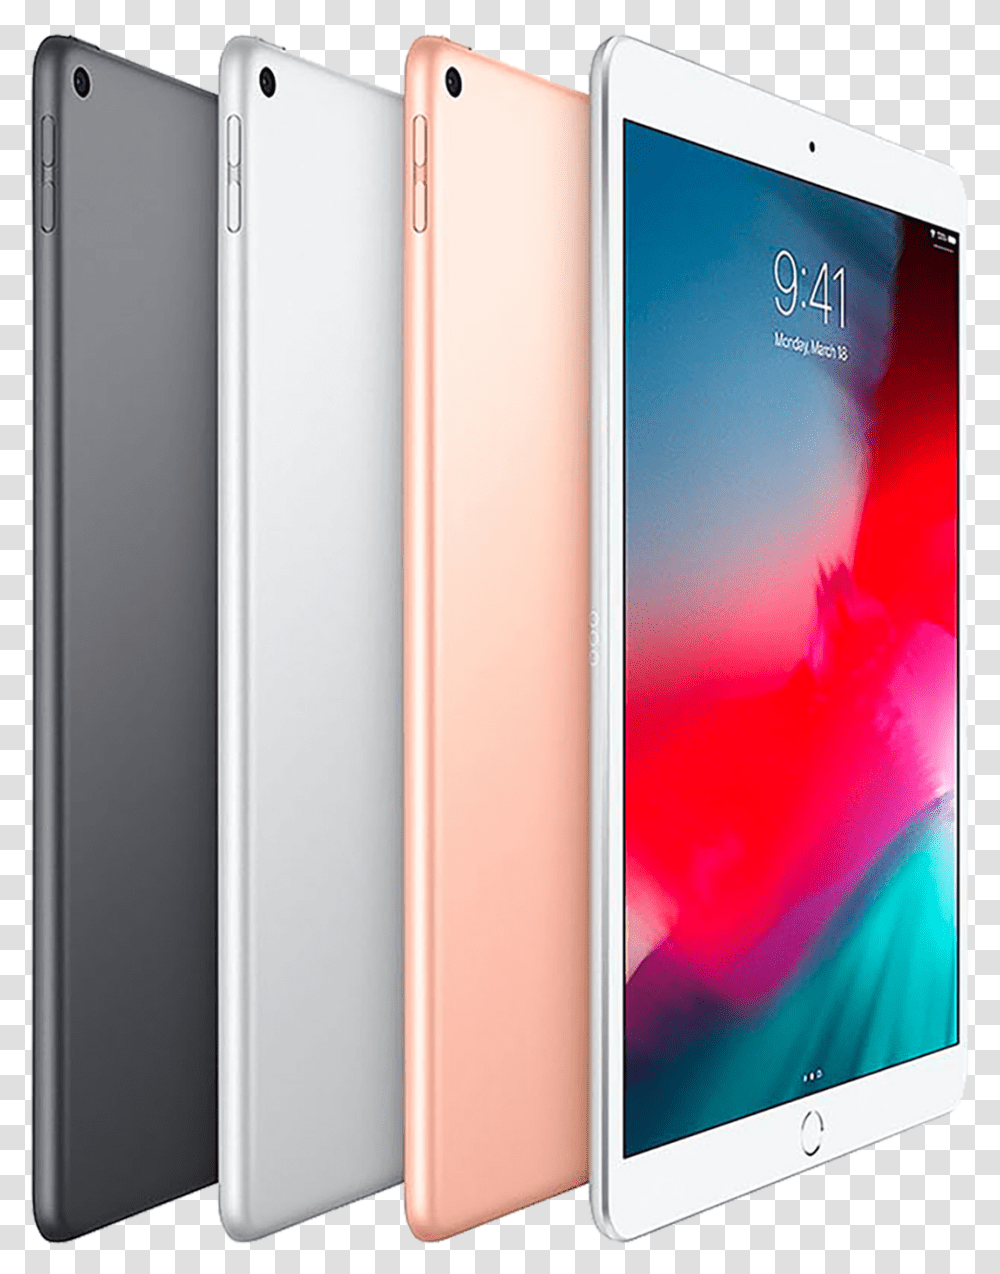 Product Image Ipad Price In Malaysia 2019, Mobile Phone, Electronics, Cell Phone, Iphone Transparent Png